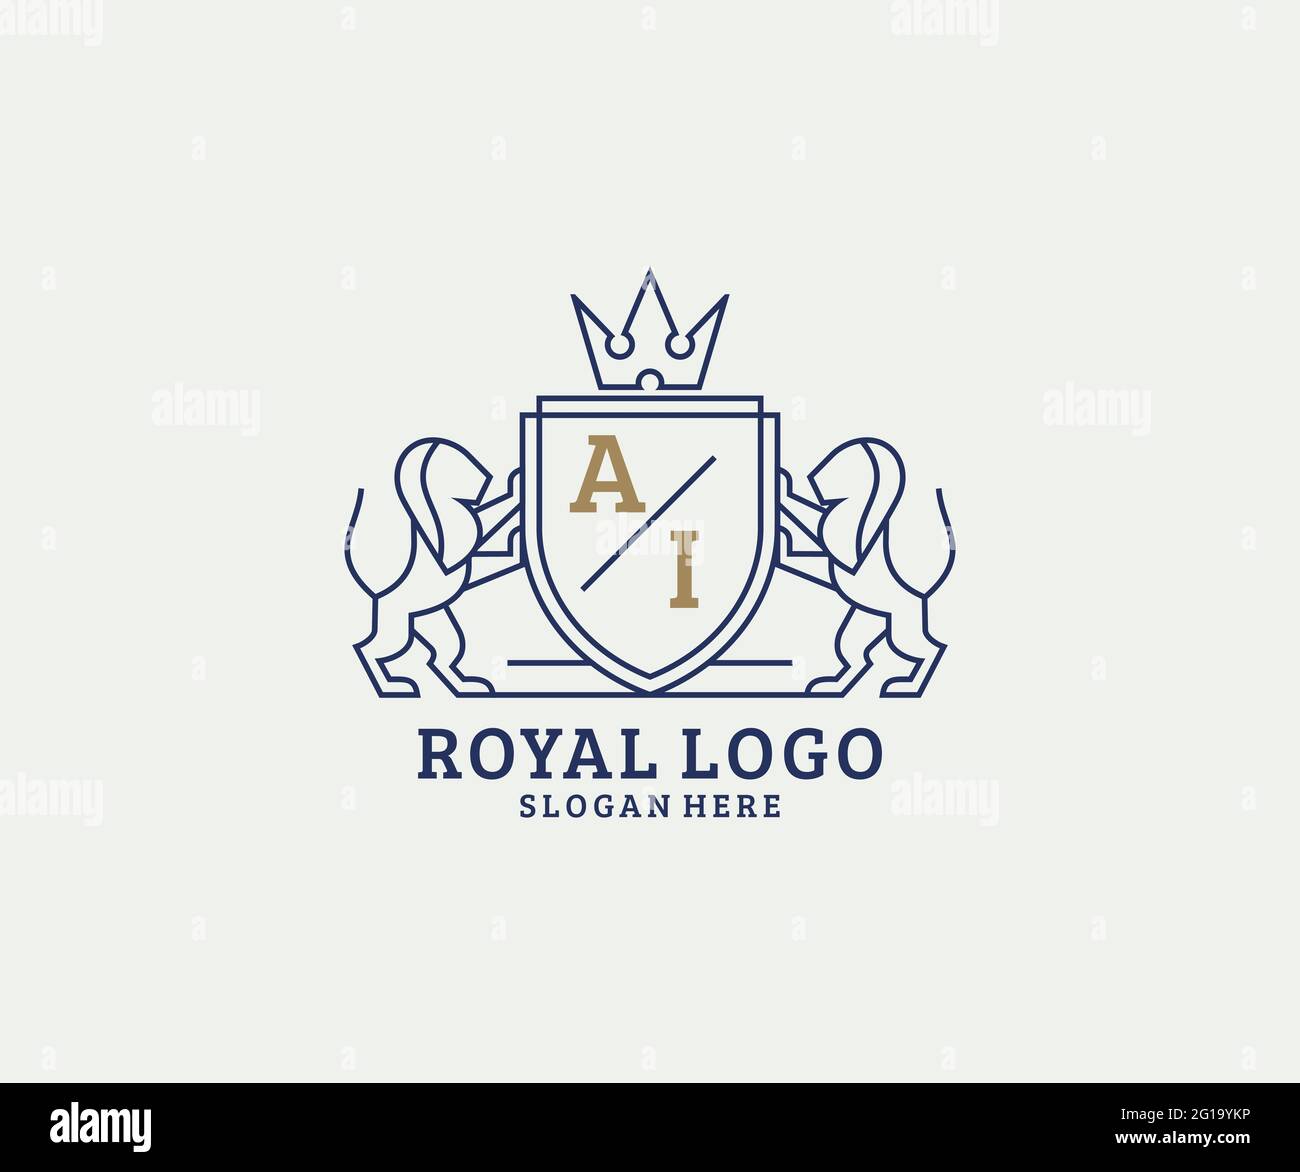 AI Letter Lion Royal Luxury Logo template in vector art for Restaurant, Royalty, Boutique, Cafe, Hotel, Heraldic, Jewelry, Fashion and other vector il Stock Vector